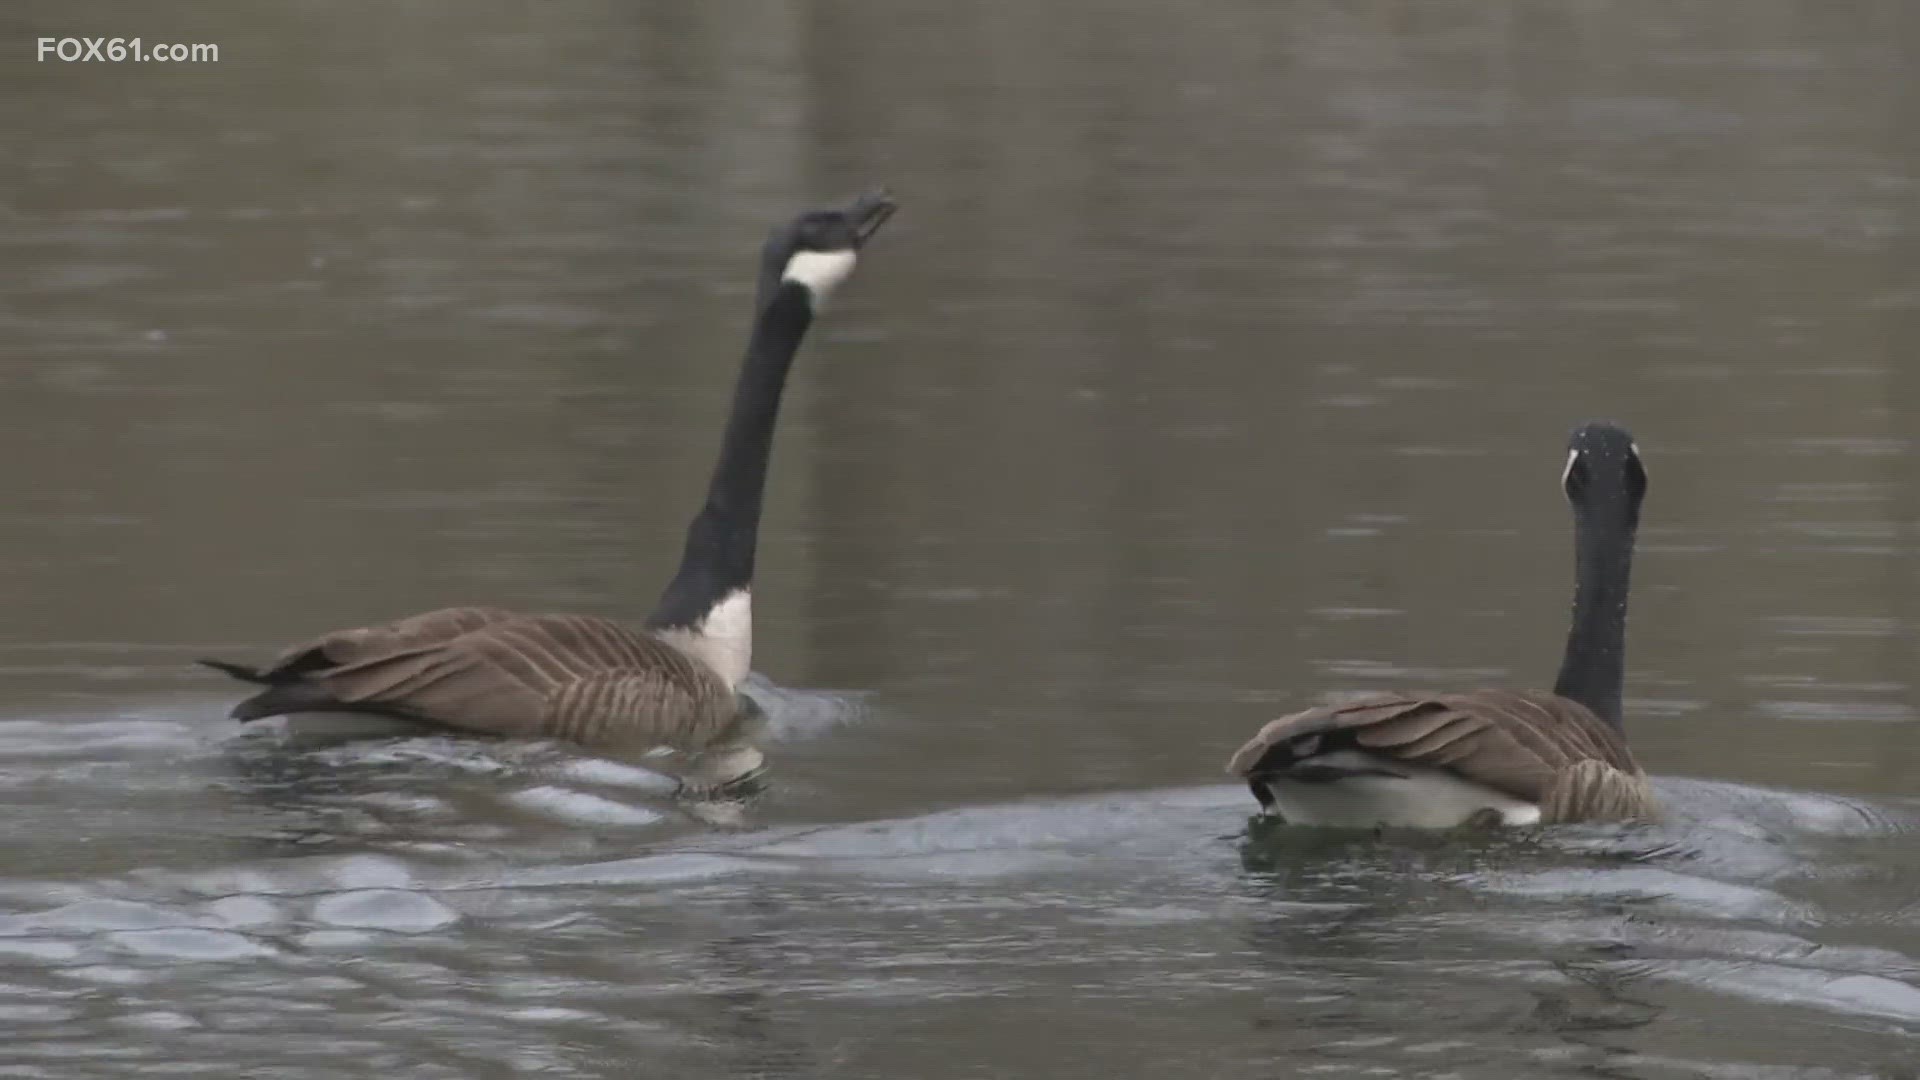 Officials from Bristol Parks and Rec will meet once again to talk about how to keep the geese at bay at local parks.